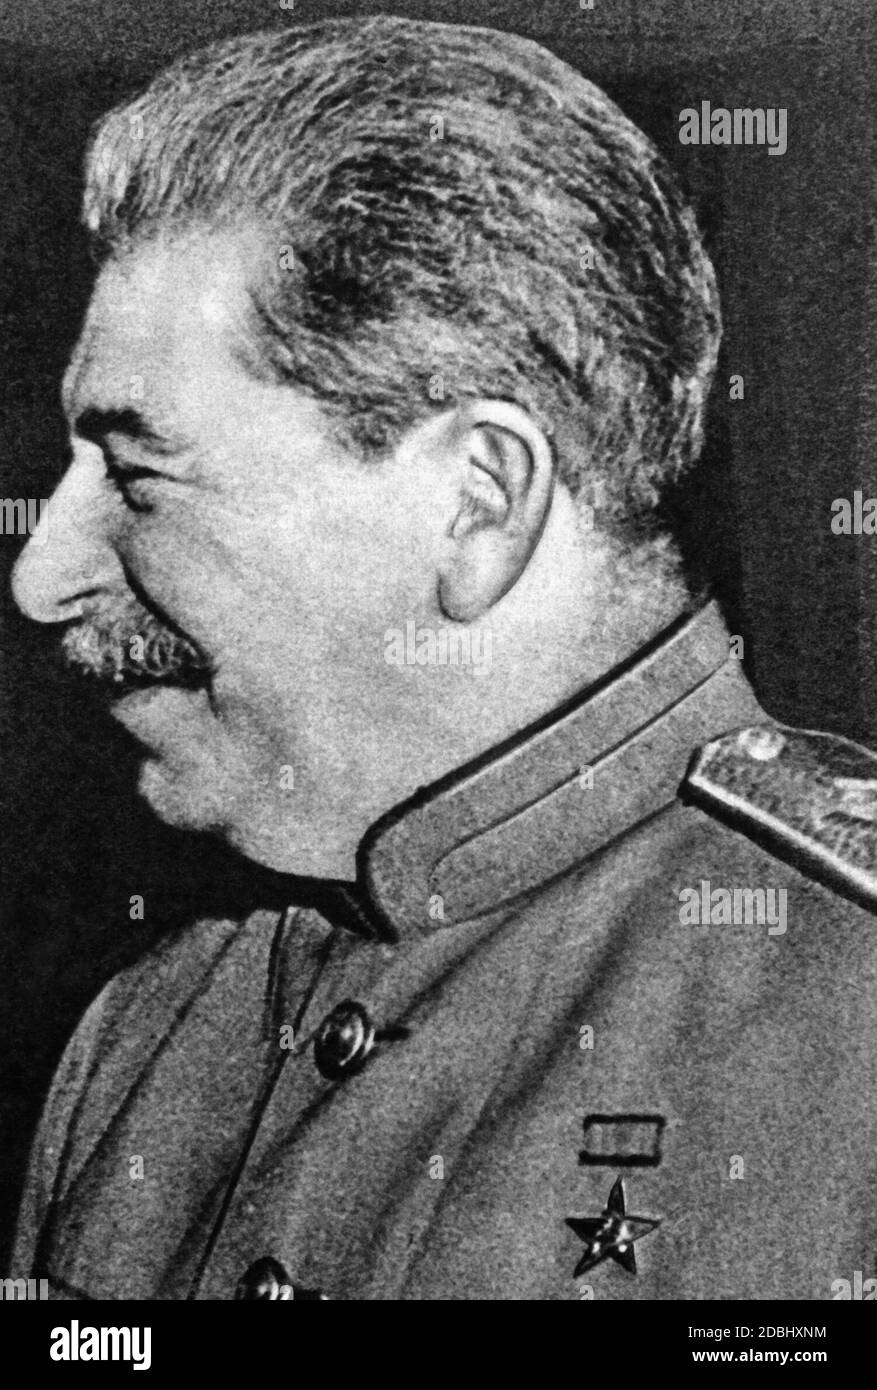 Ioseb Besarionis dz? Djugashvili, adopted name Stalin, dictator of the Soviet Union from 1927 to 1954. Photos of Stalin destined for publication were carefully selected and were intended to support the personality cult around him. The picture shows Stalin in marshal uniform with a Hero of Socialist Labor bagde, at the Yalta Conference in 1945. Stock Photo